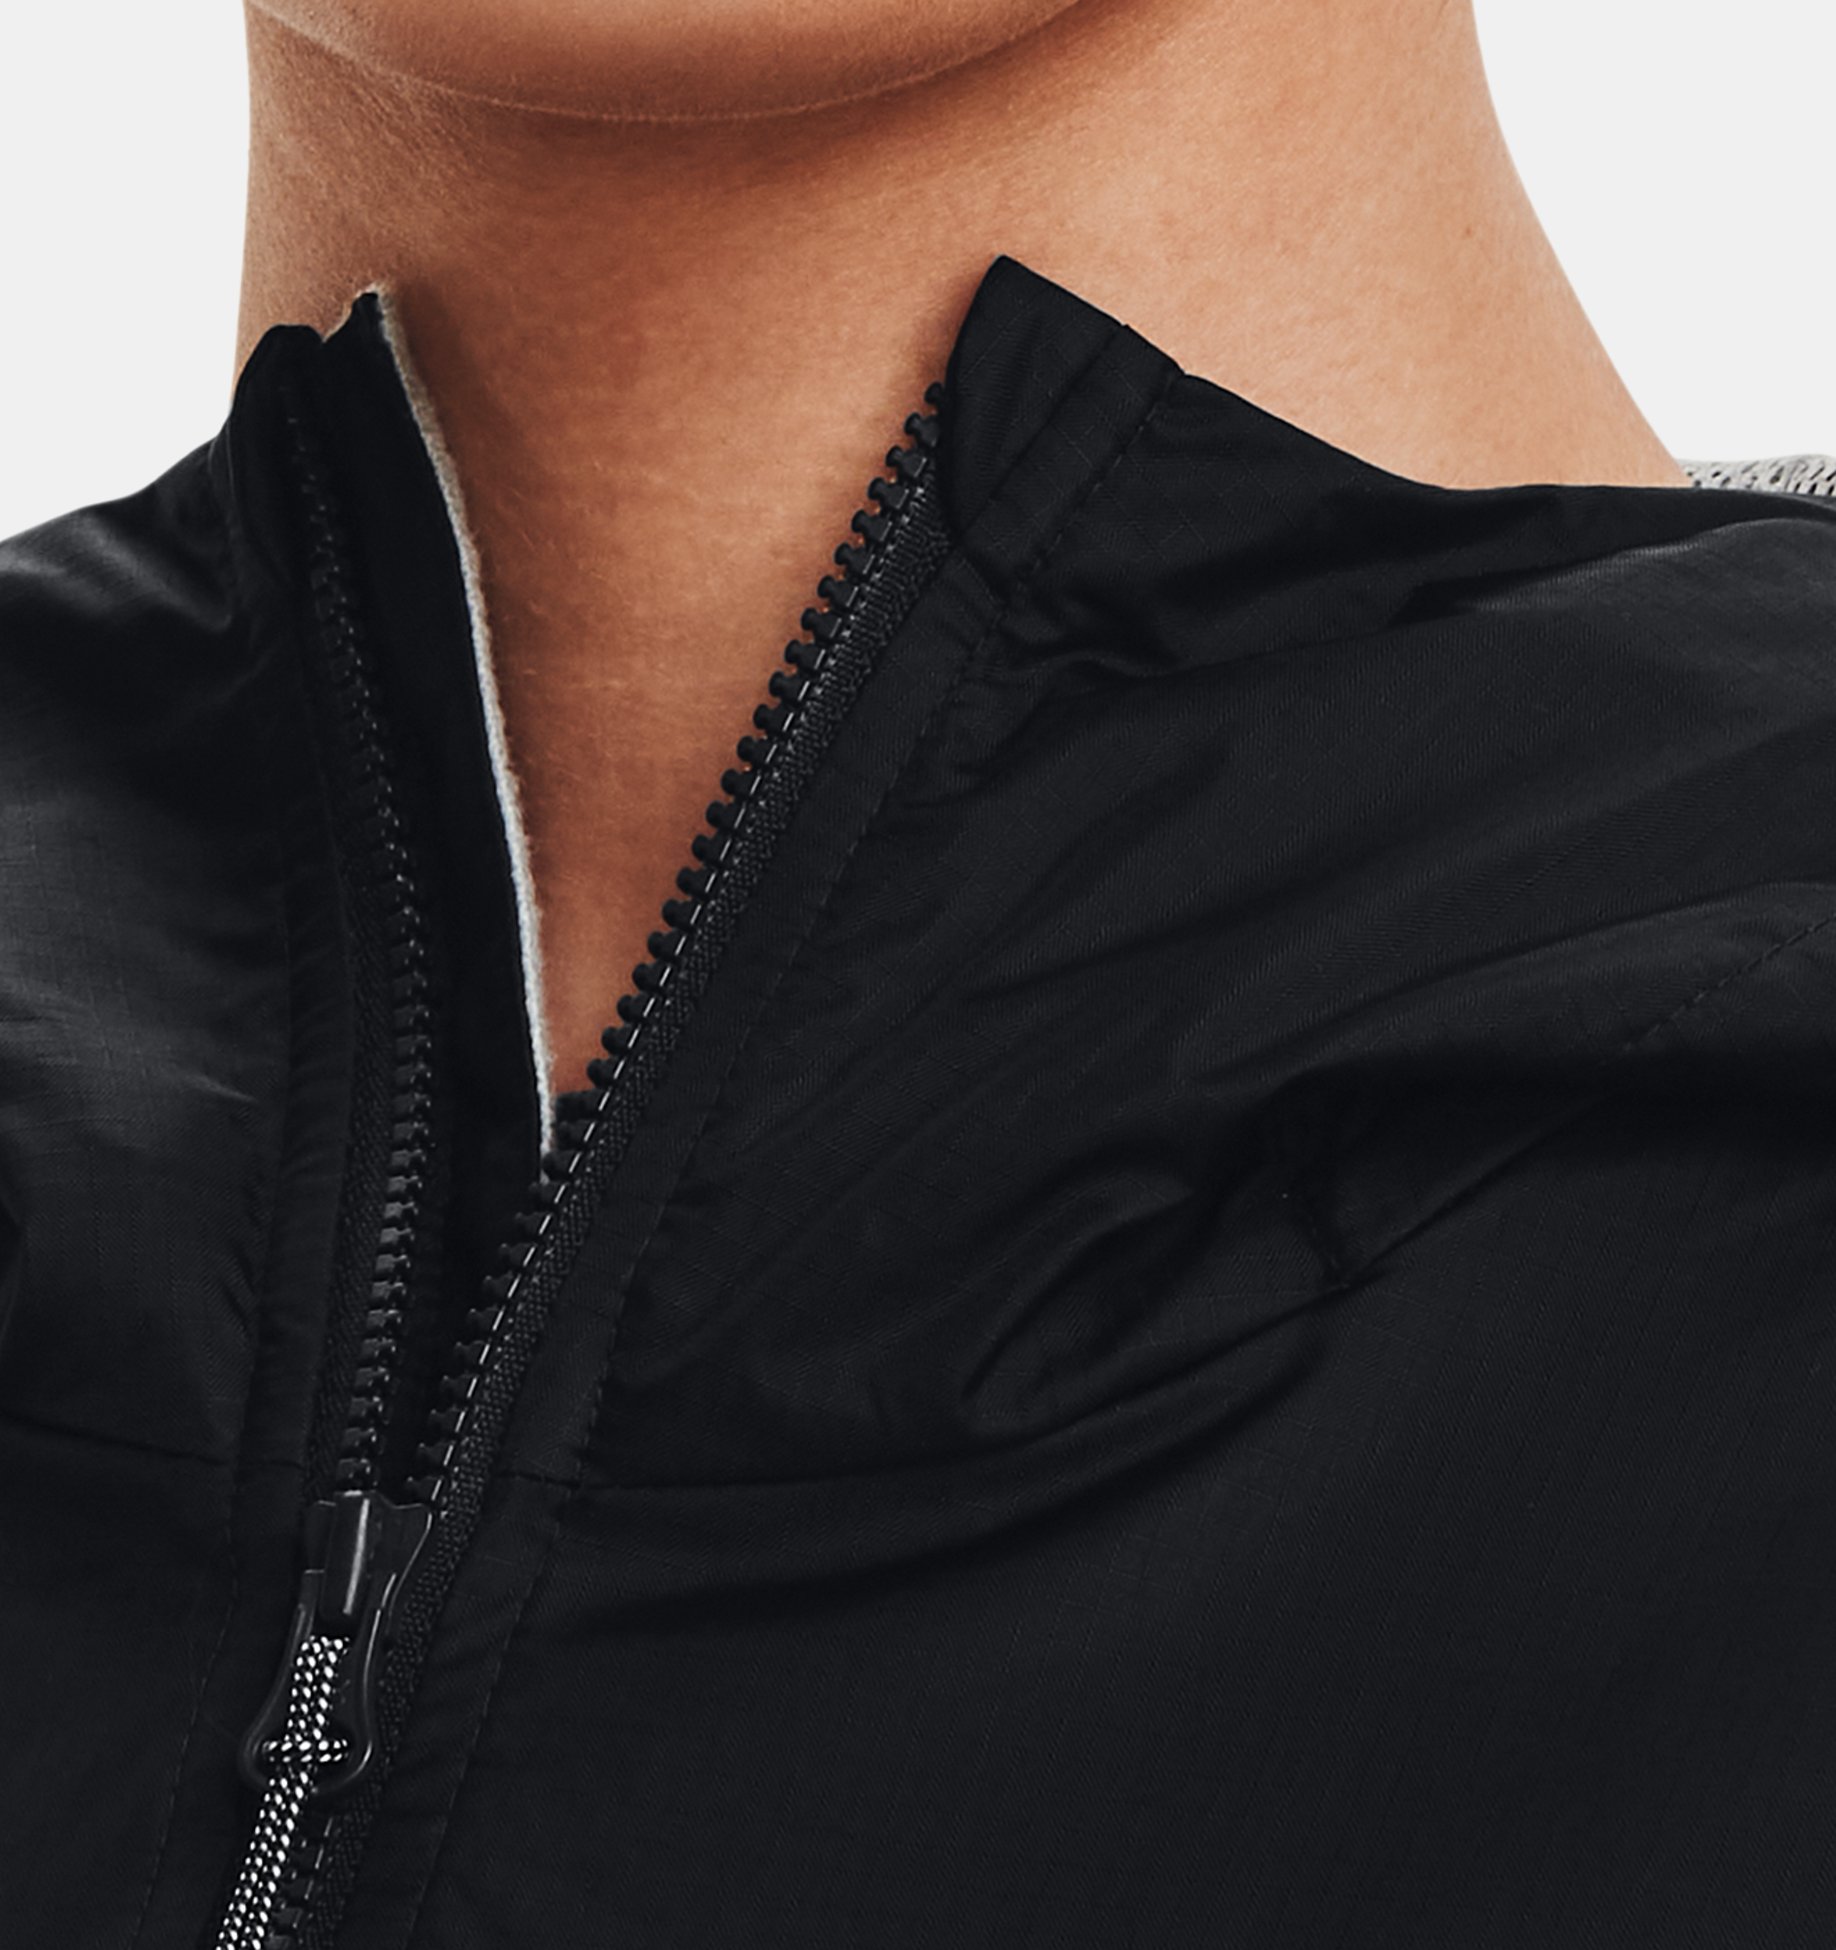 https://underarmour.scene7.com/is/image/Underarmour/V5-1321443-001_COLLAR?rp=standard-0pad|pdpZoomDesktop&scl=0.72&fmt=jpg&qlt=85&resMode=sharp2&cache=on,on&bgc=f0f0f0&wid=1836&hei=1950&size=1500,1500